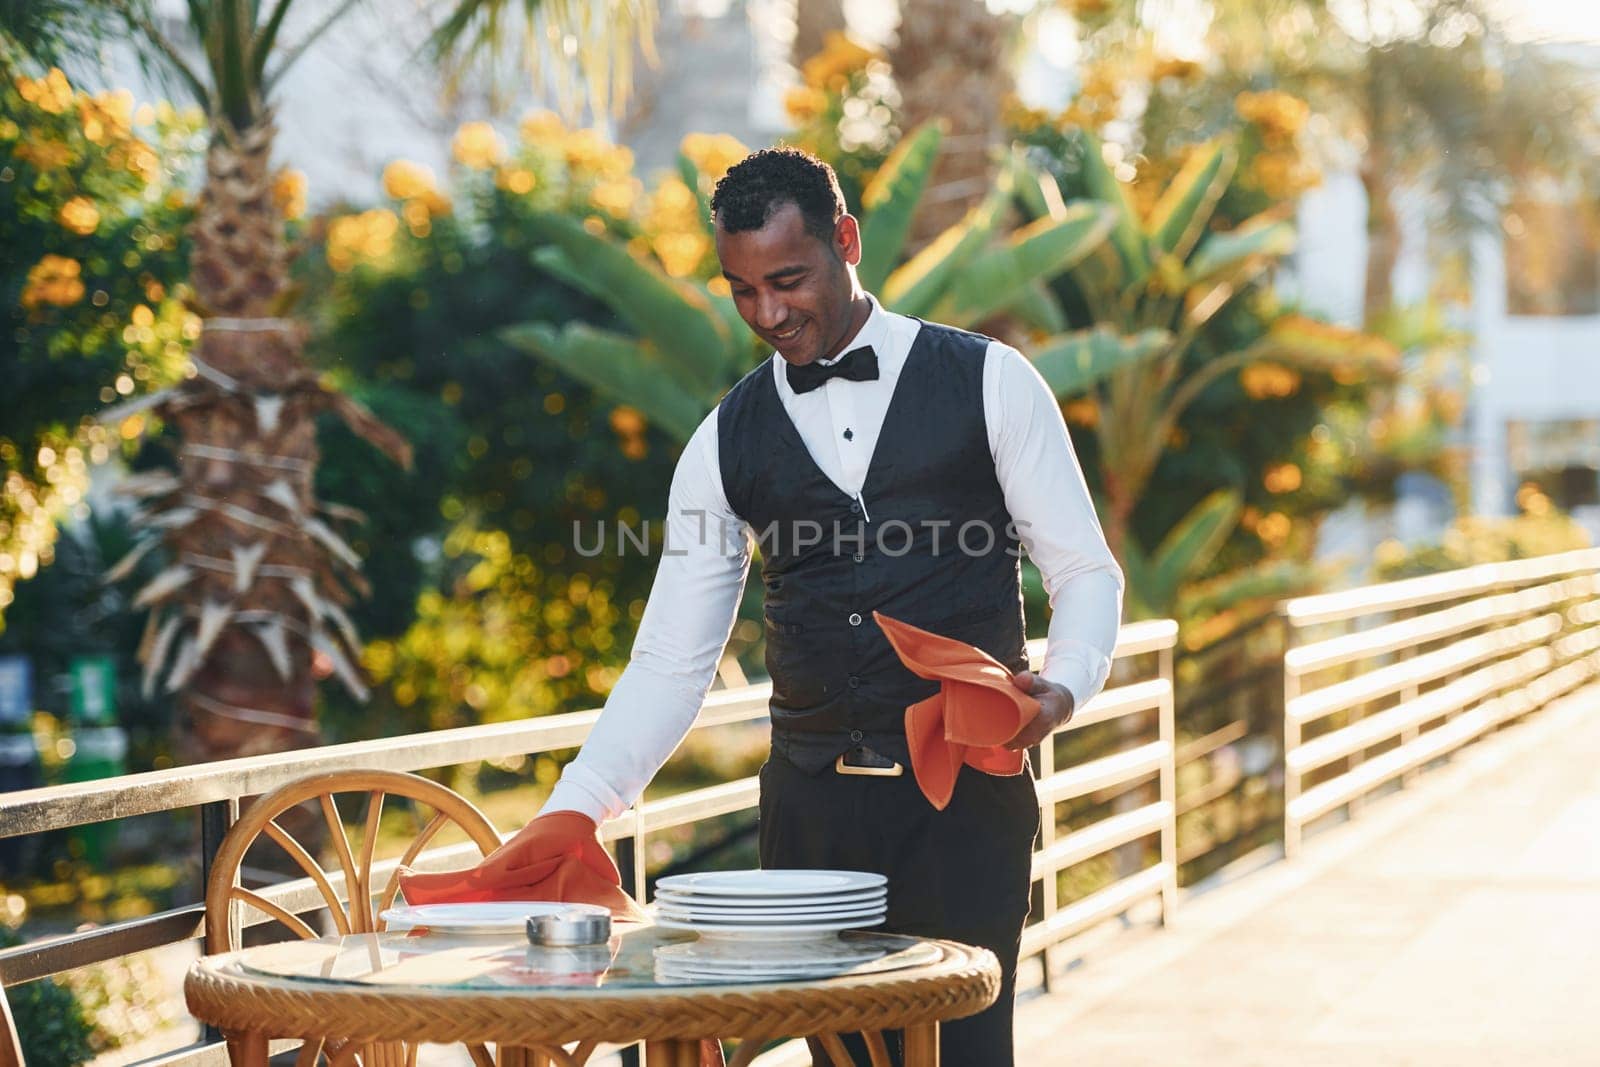 Wipes plates by red cloth. Black waiter in formal clothes is at his work outdoors at sunny daytime.